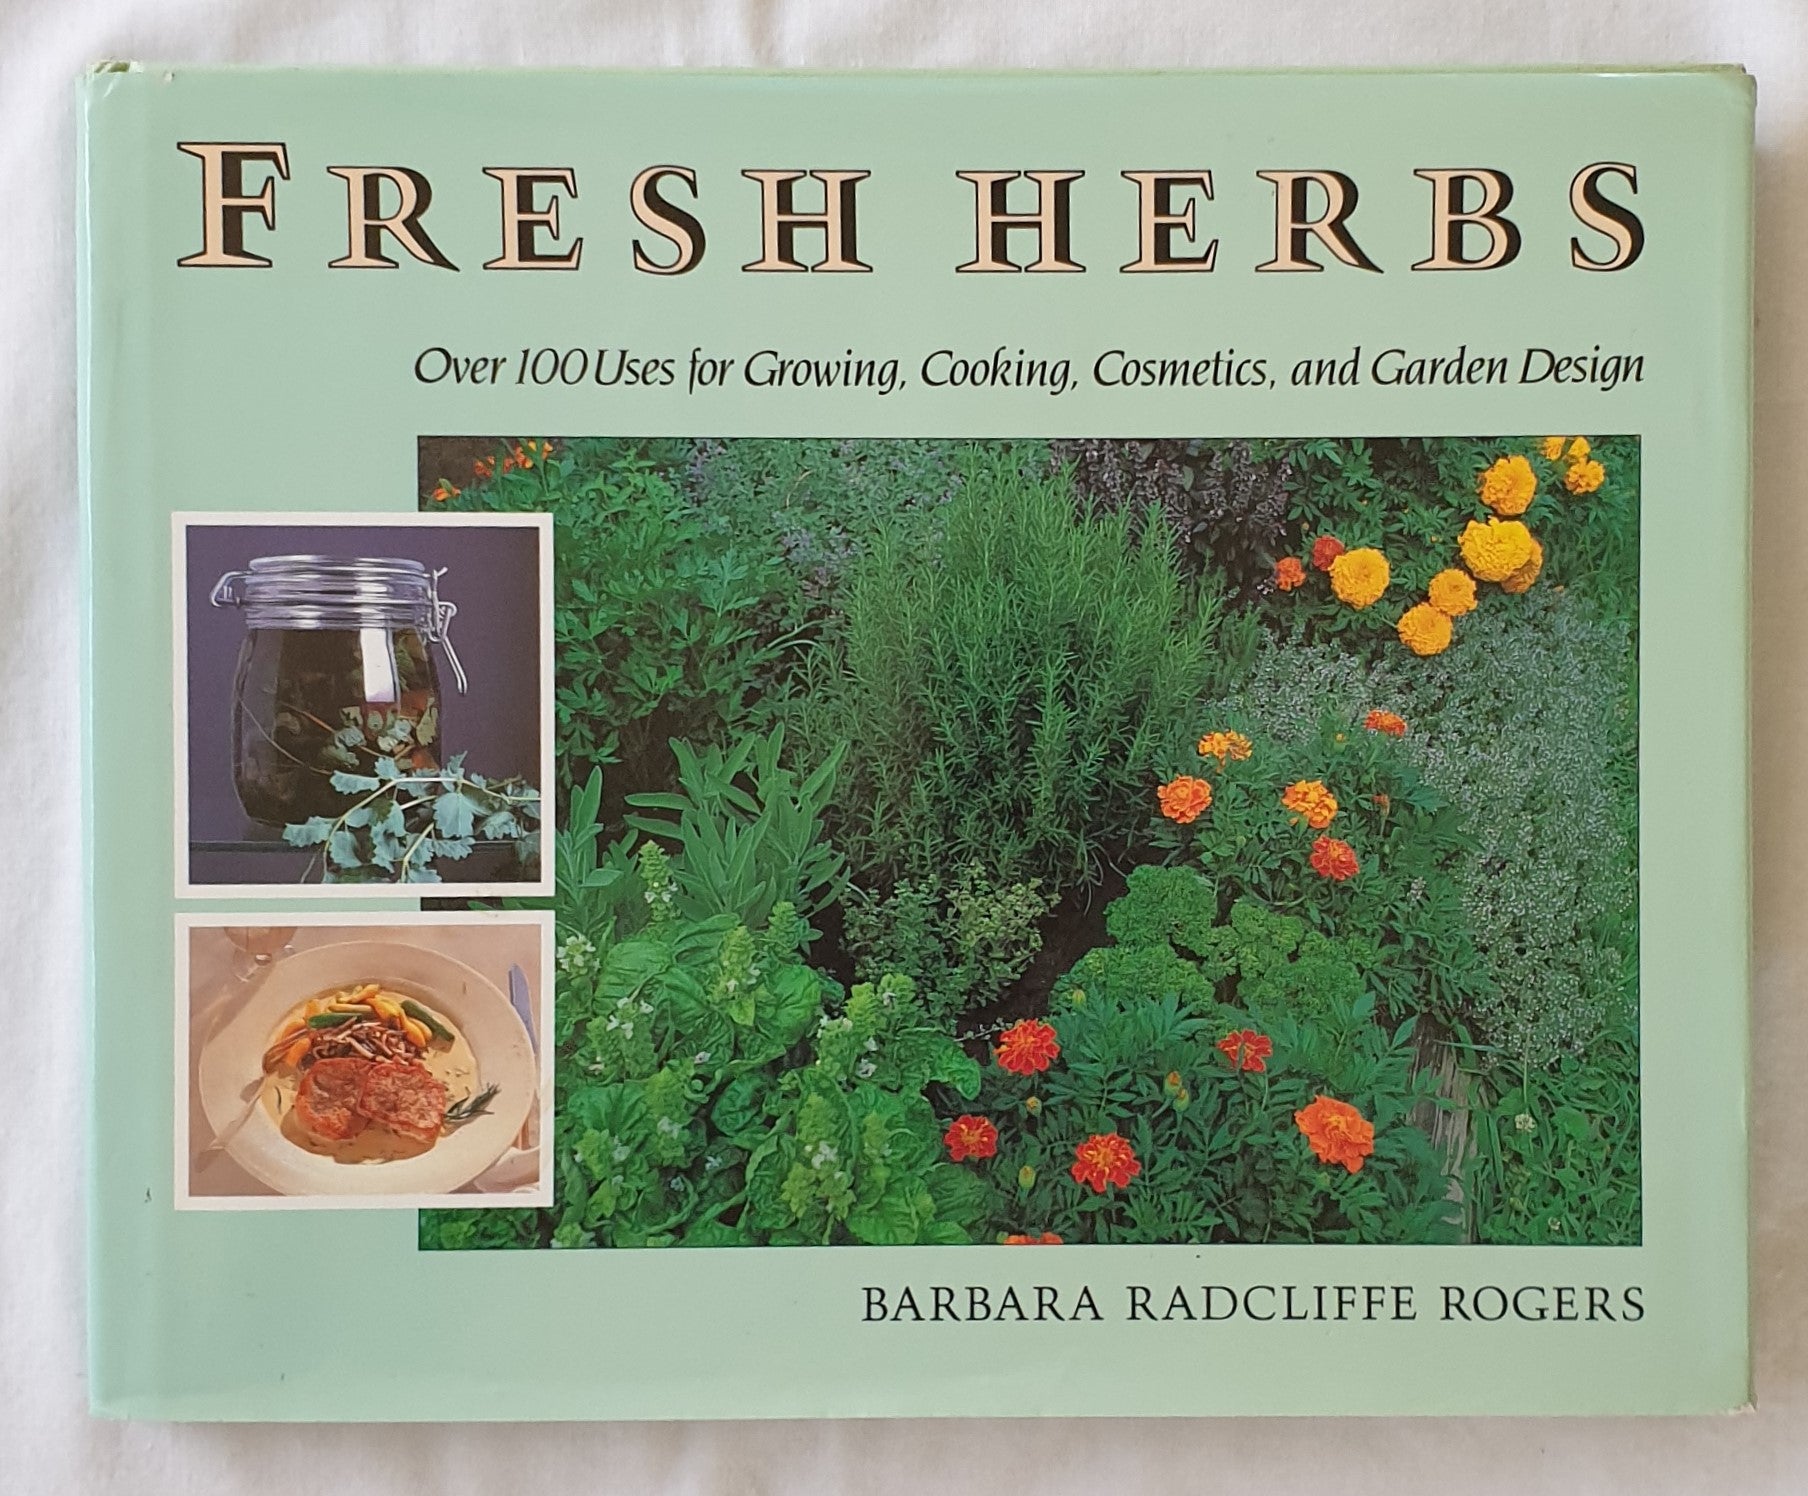 Fresh Herbs  Over 100 Uses for Growing, Cooking, Cosmetics, and Garden Design  by Barbara Radcliffe Rogers